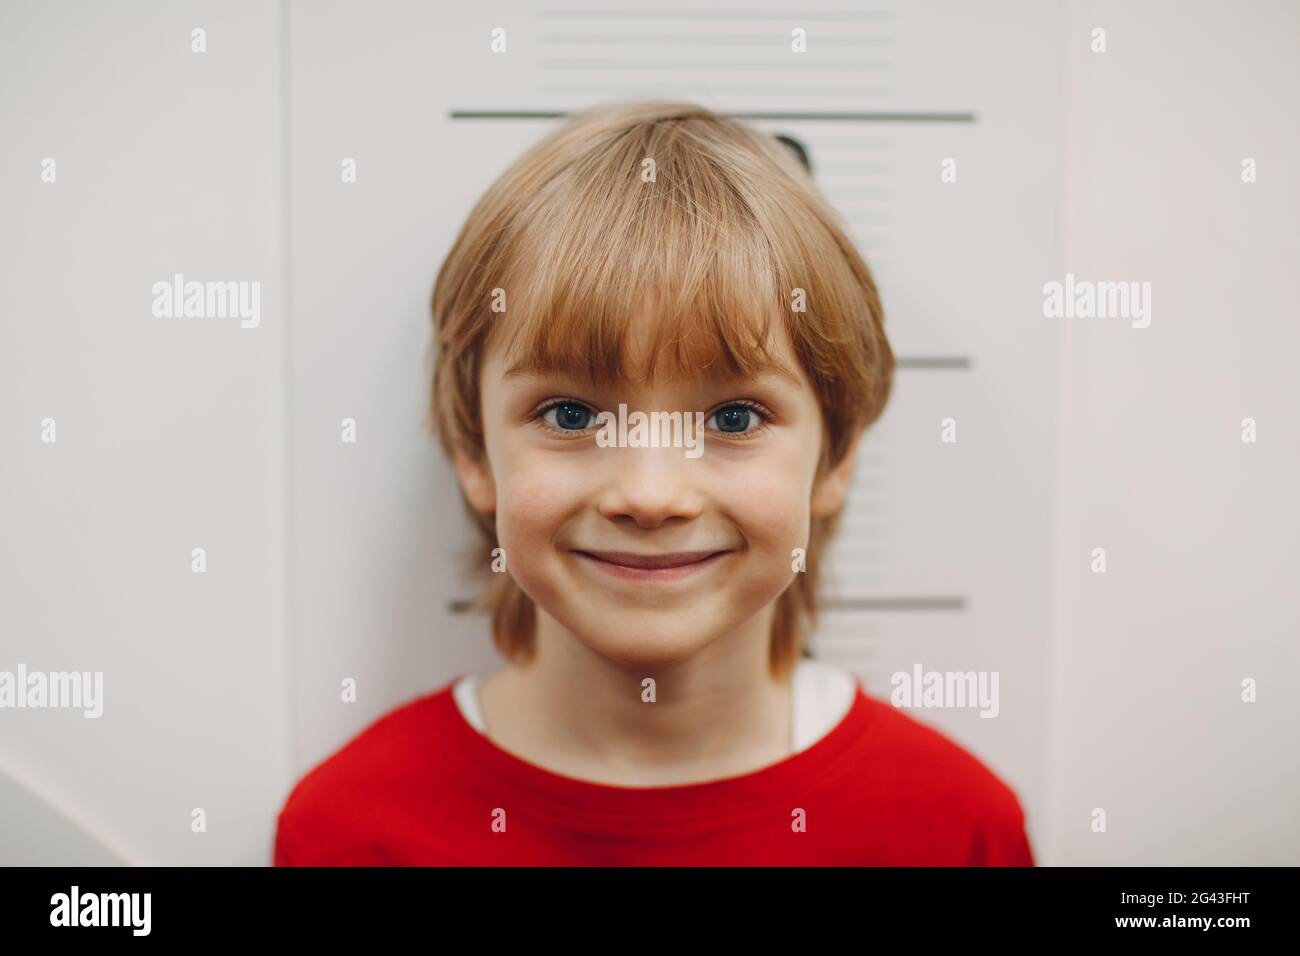 Children little boy are measured growth height at wall scale. Kid smile portrait. Stock Photo